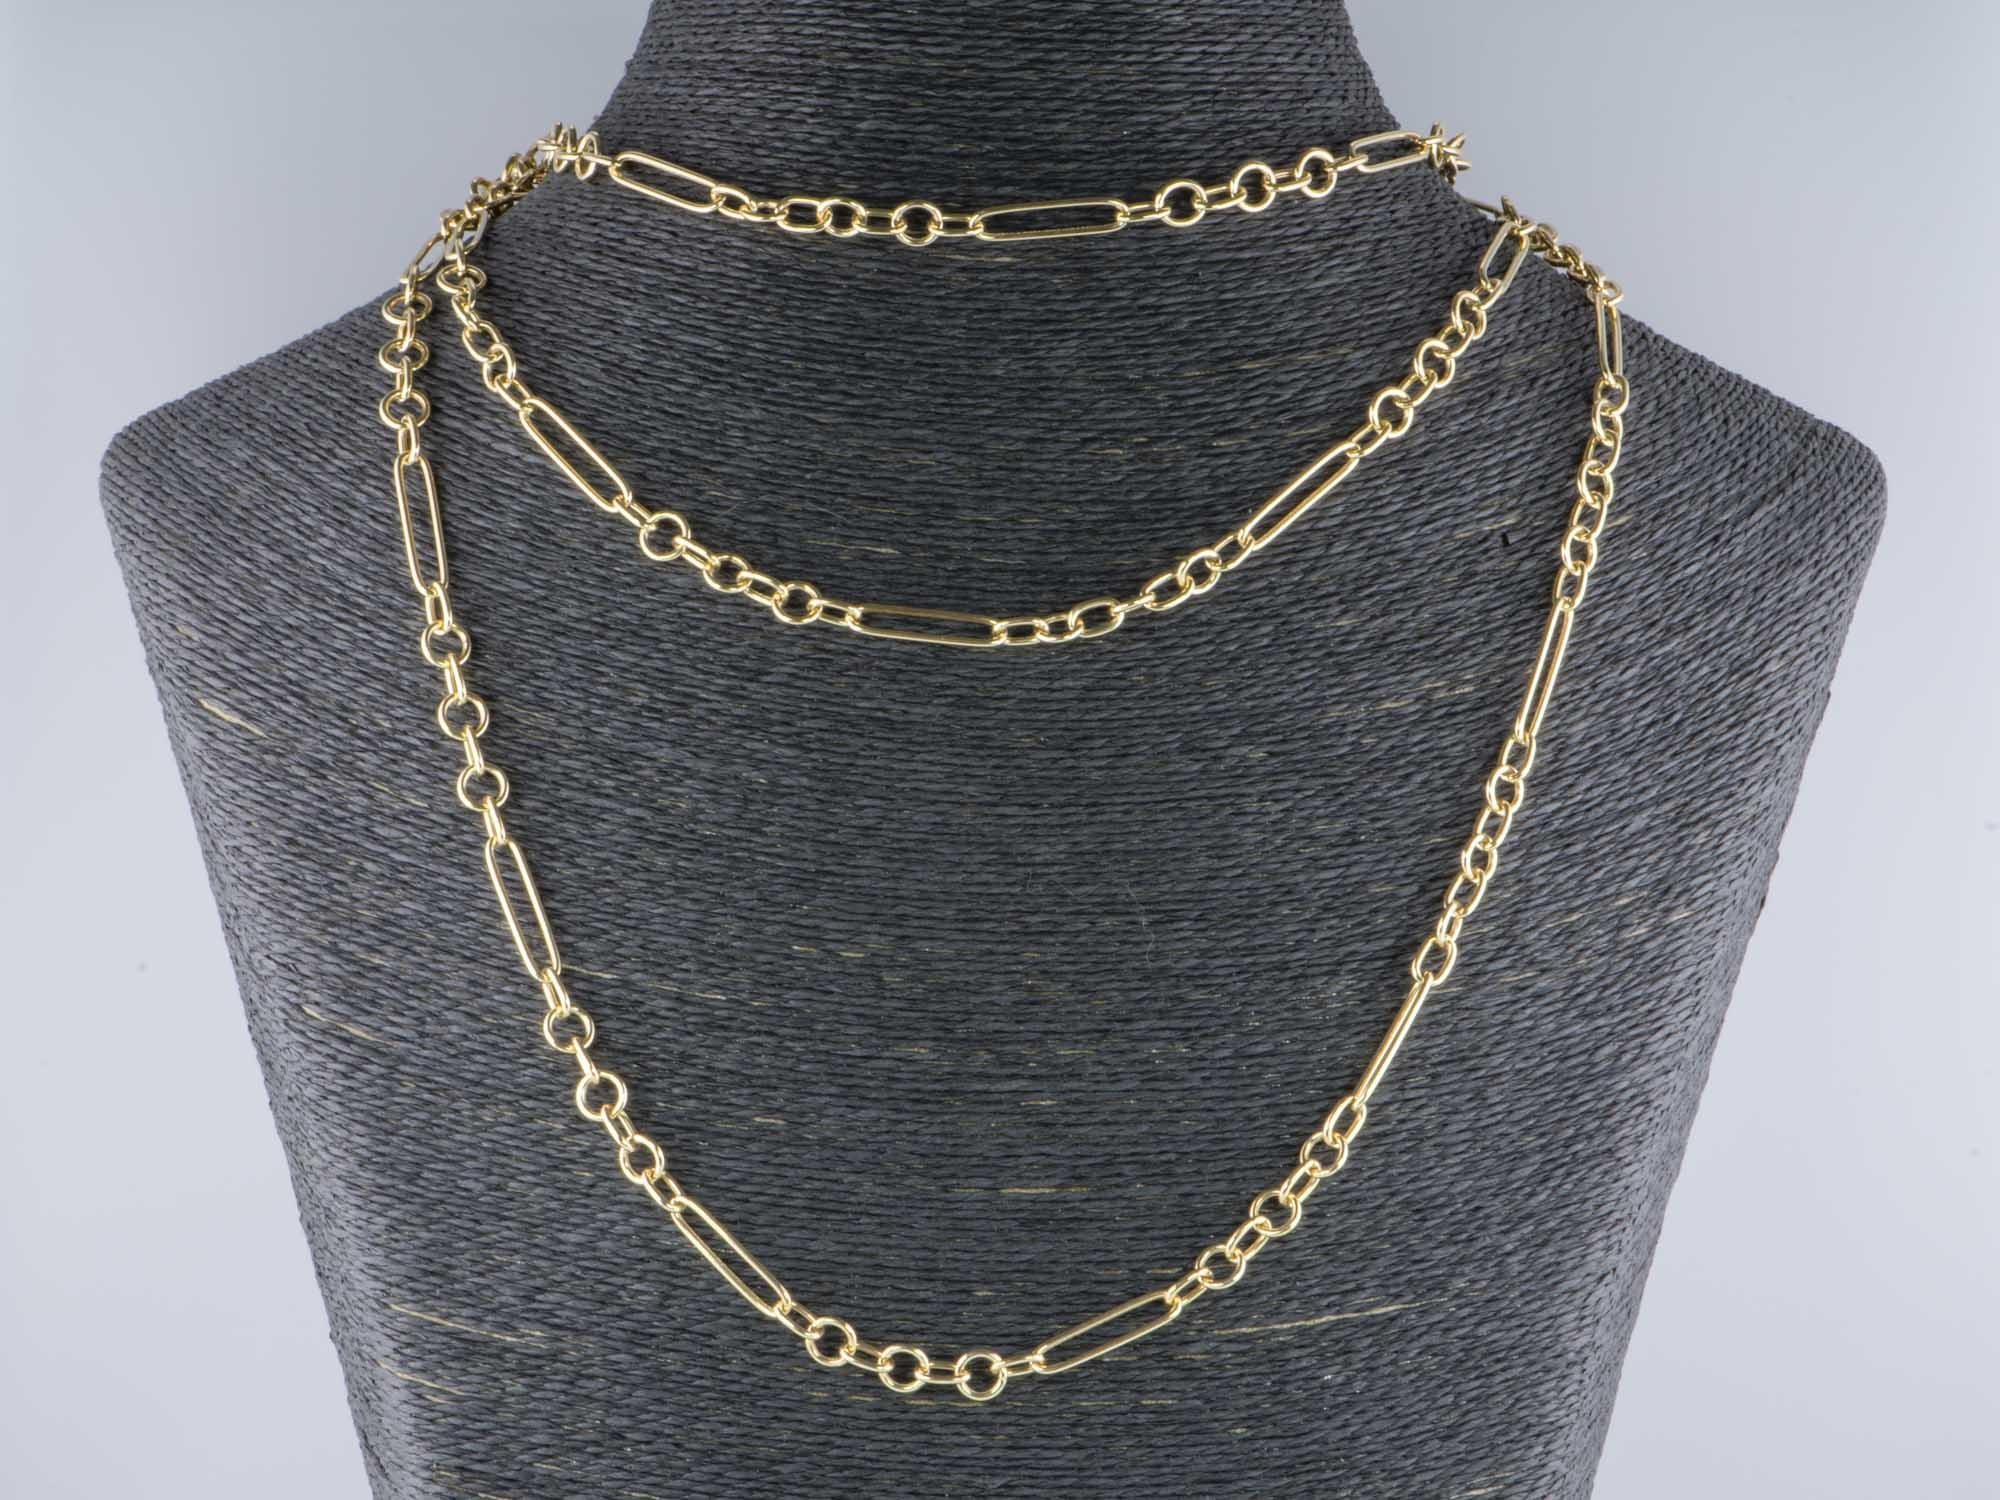   Luxuriate in designer style with this gorgeous gold necklace! The versatile mixed link design and varying length will work well with a casual outfit, or dress up a more formal outfit. It also allows you to add on any number of links and pendants,